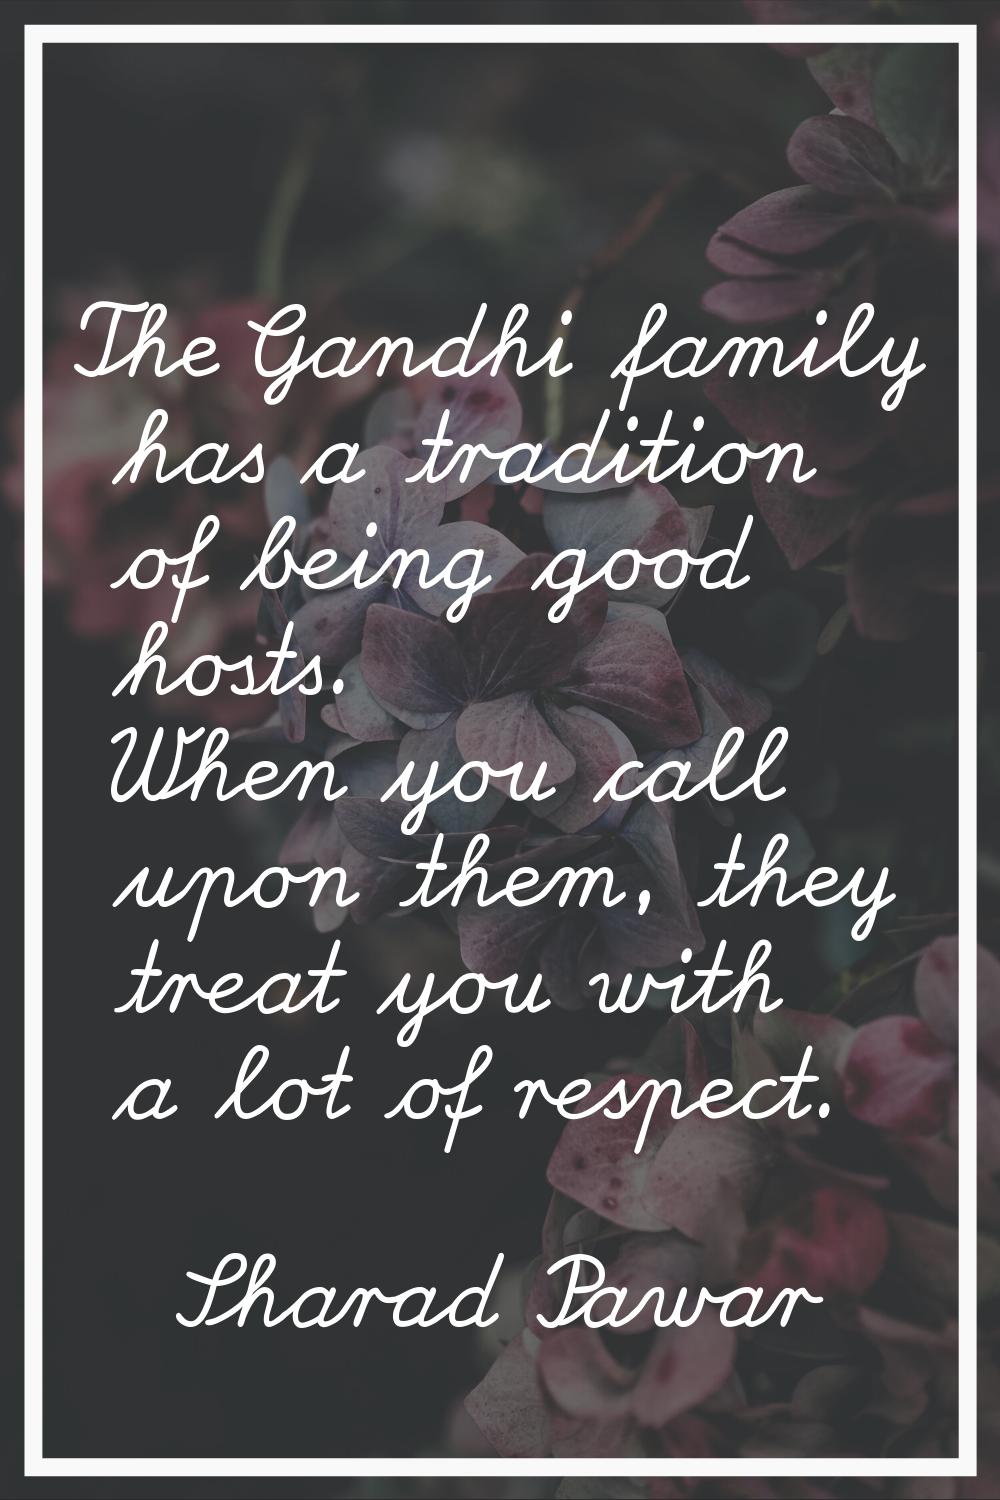 The Gandhi family has a tradition of being good hosts. When you call upon them, they treat you with